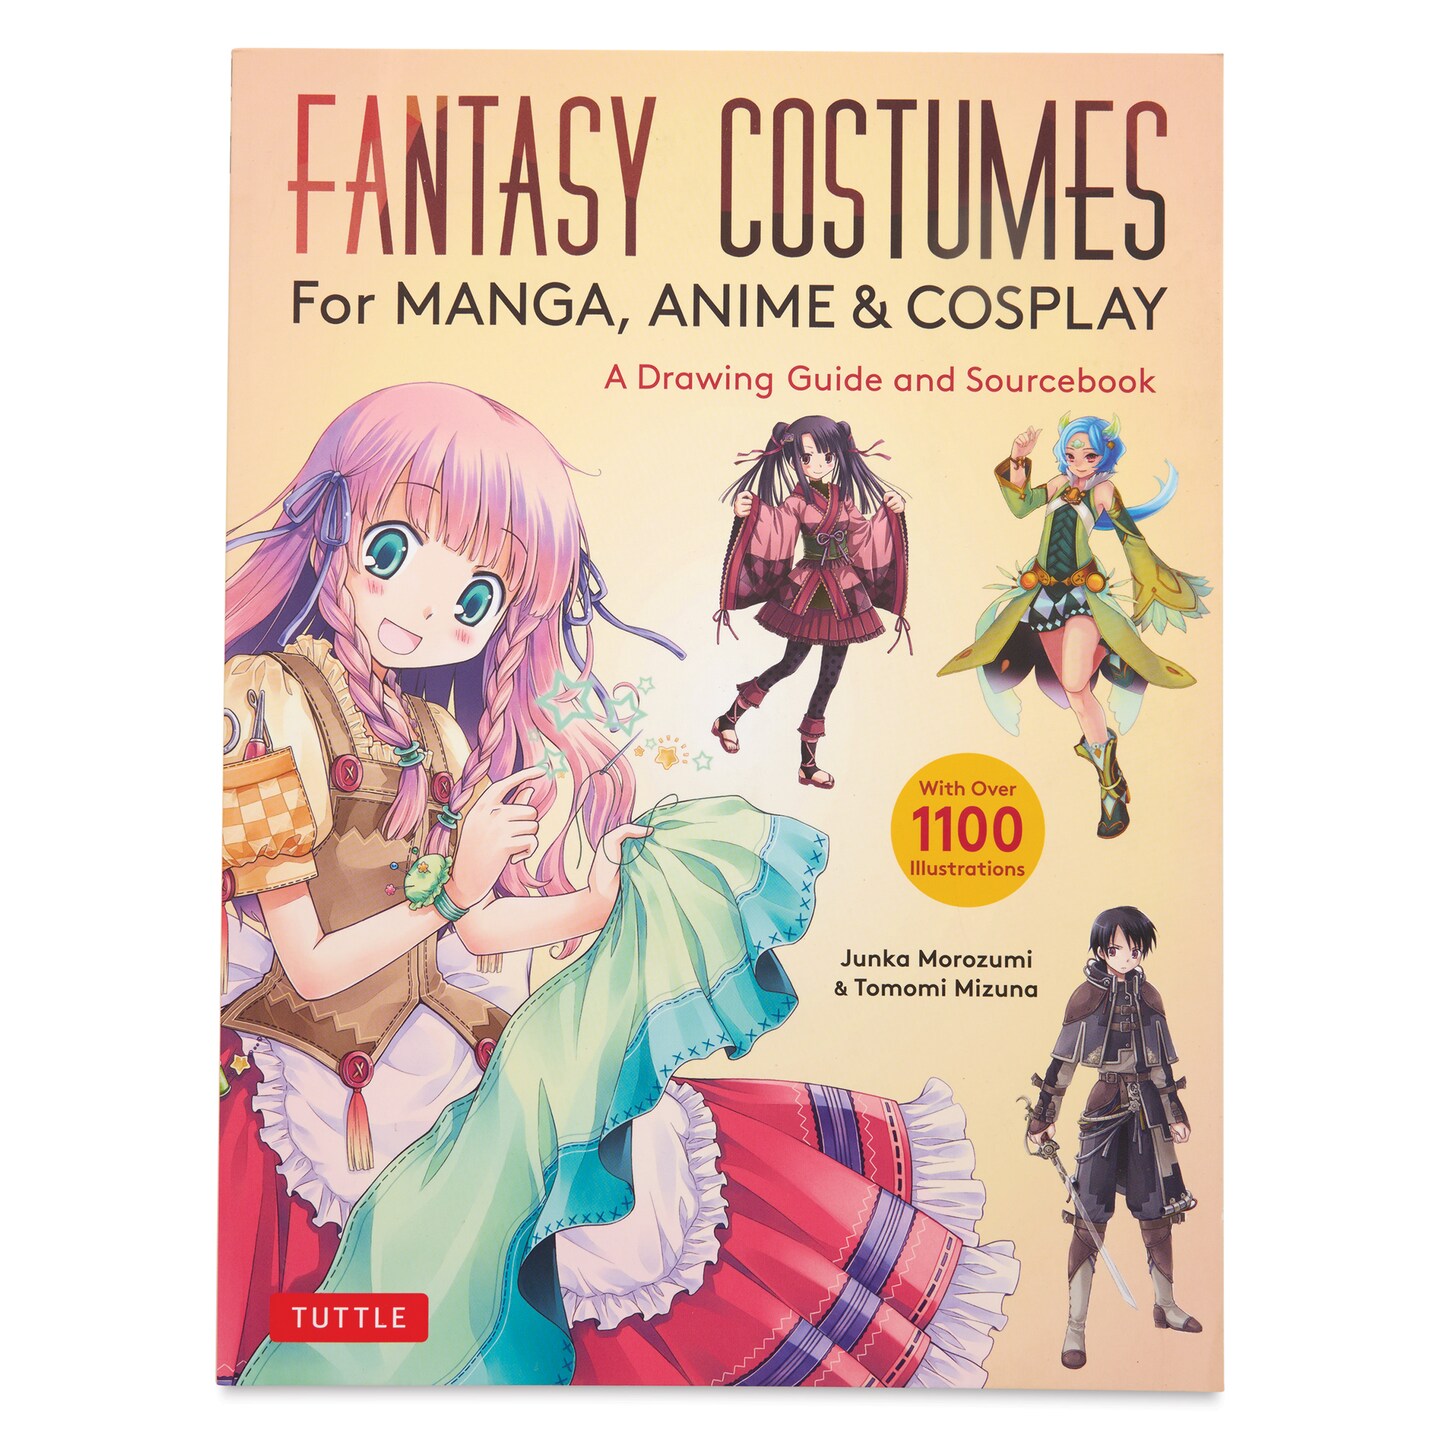 Fantasy Costumes For Manga, Anime and Cosplay